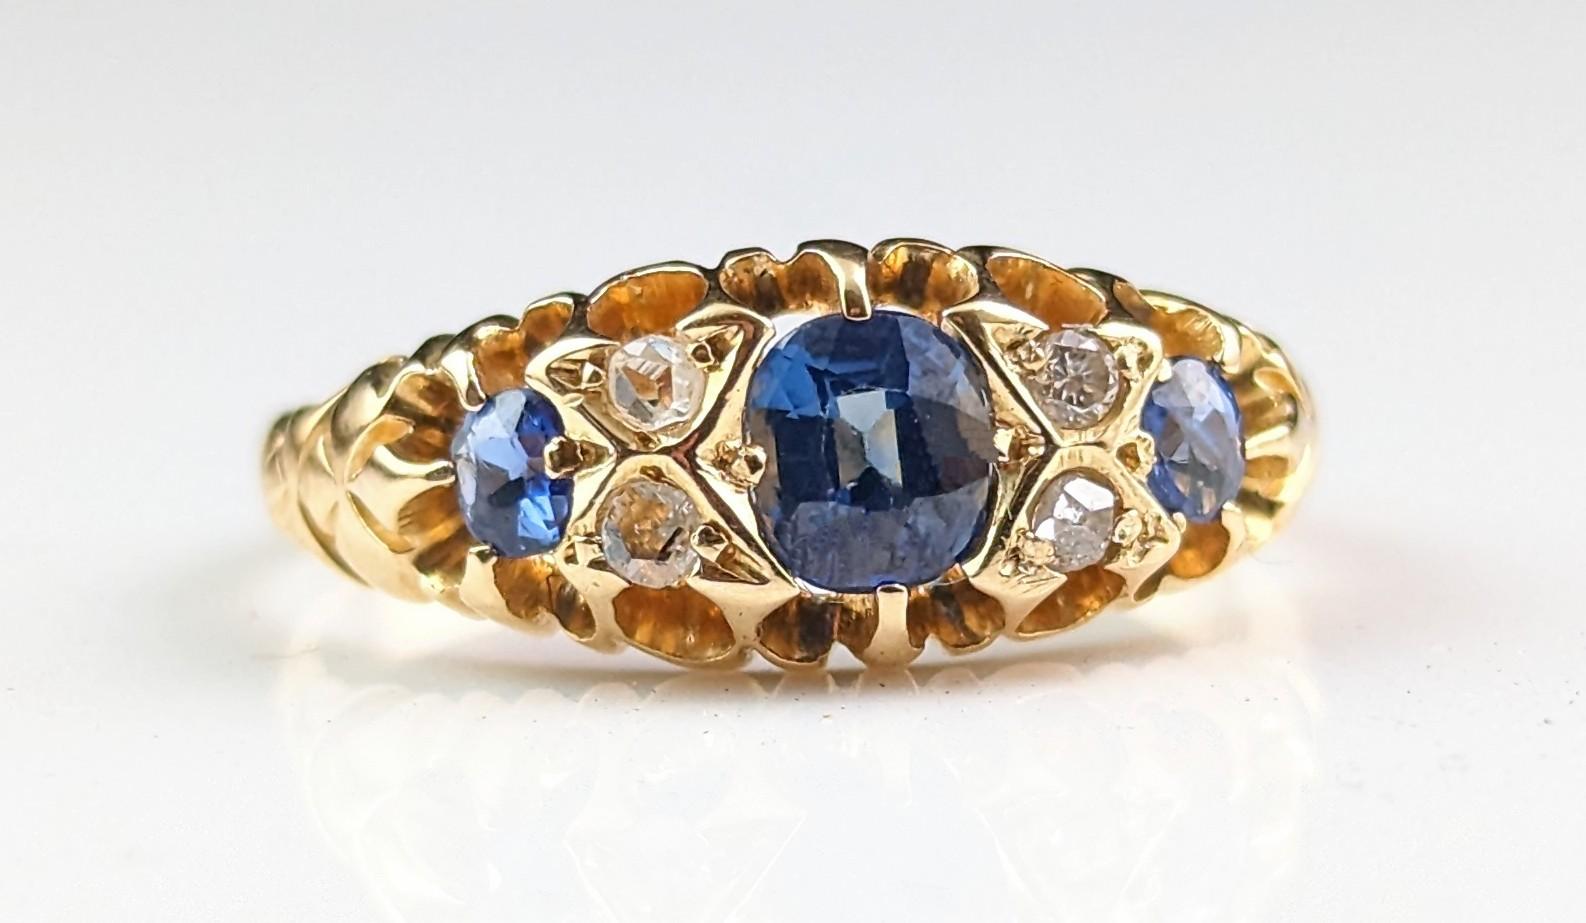 Antique Sapphire and Diamond Ring, 18k Yellow Gold, Victorian 1